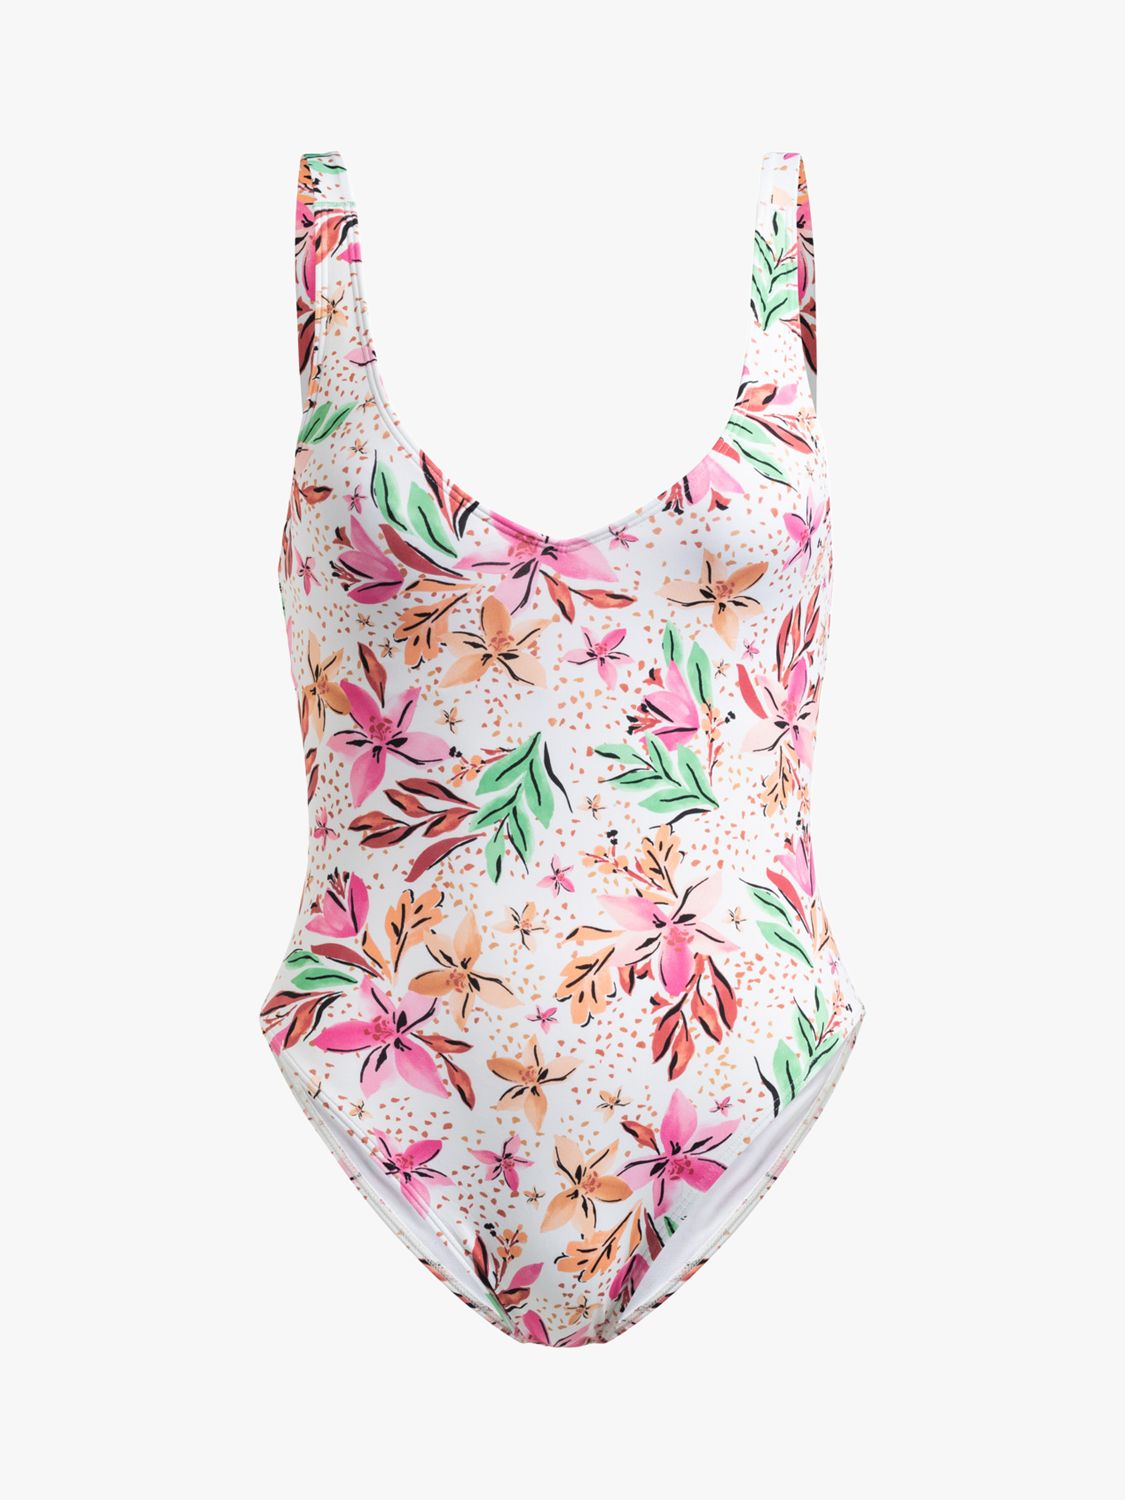 Buy Roxy Tropical Print Swimsuit, White/Multi Online at johnlewis.com